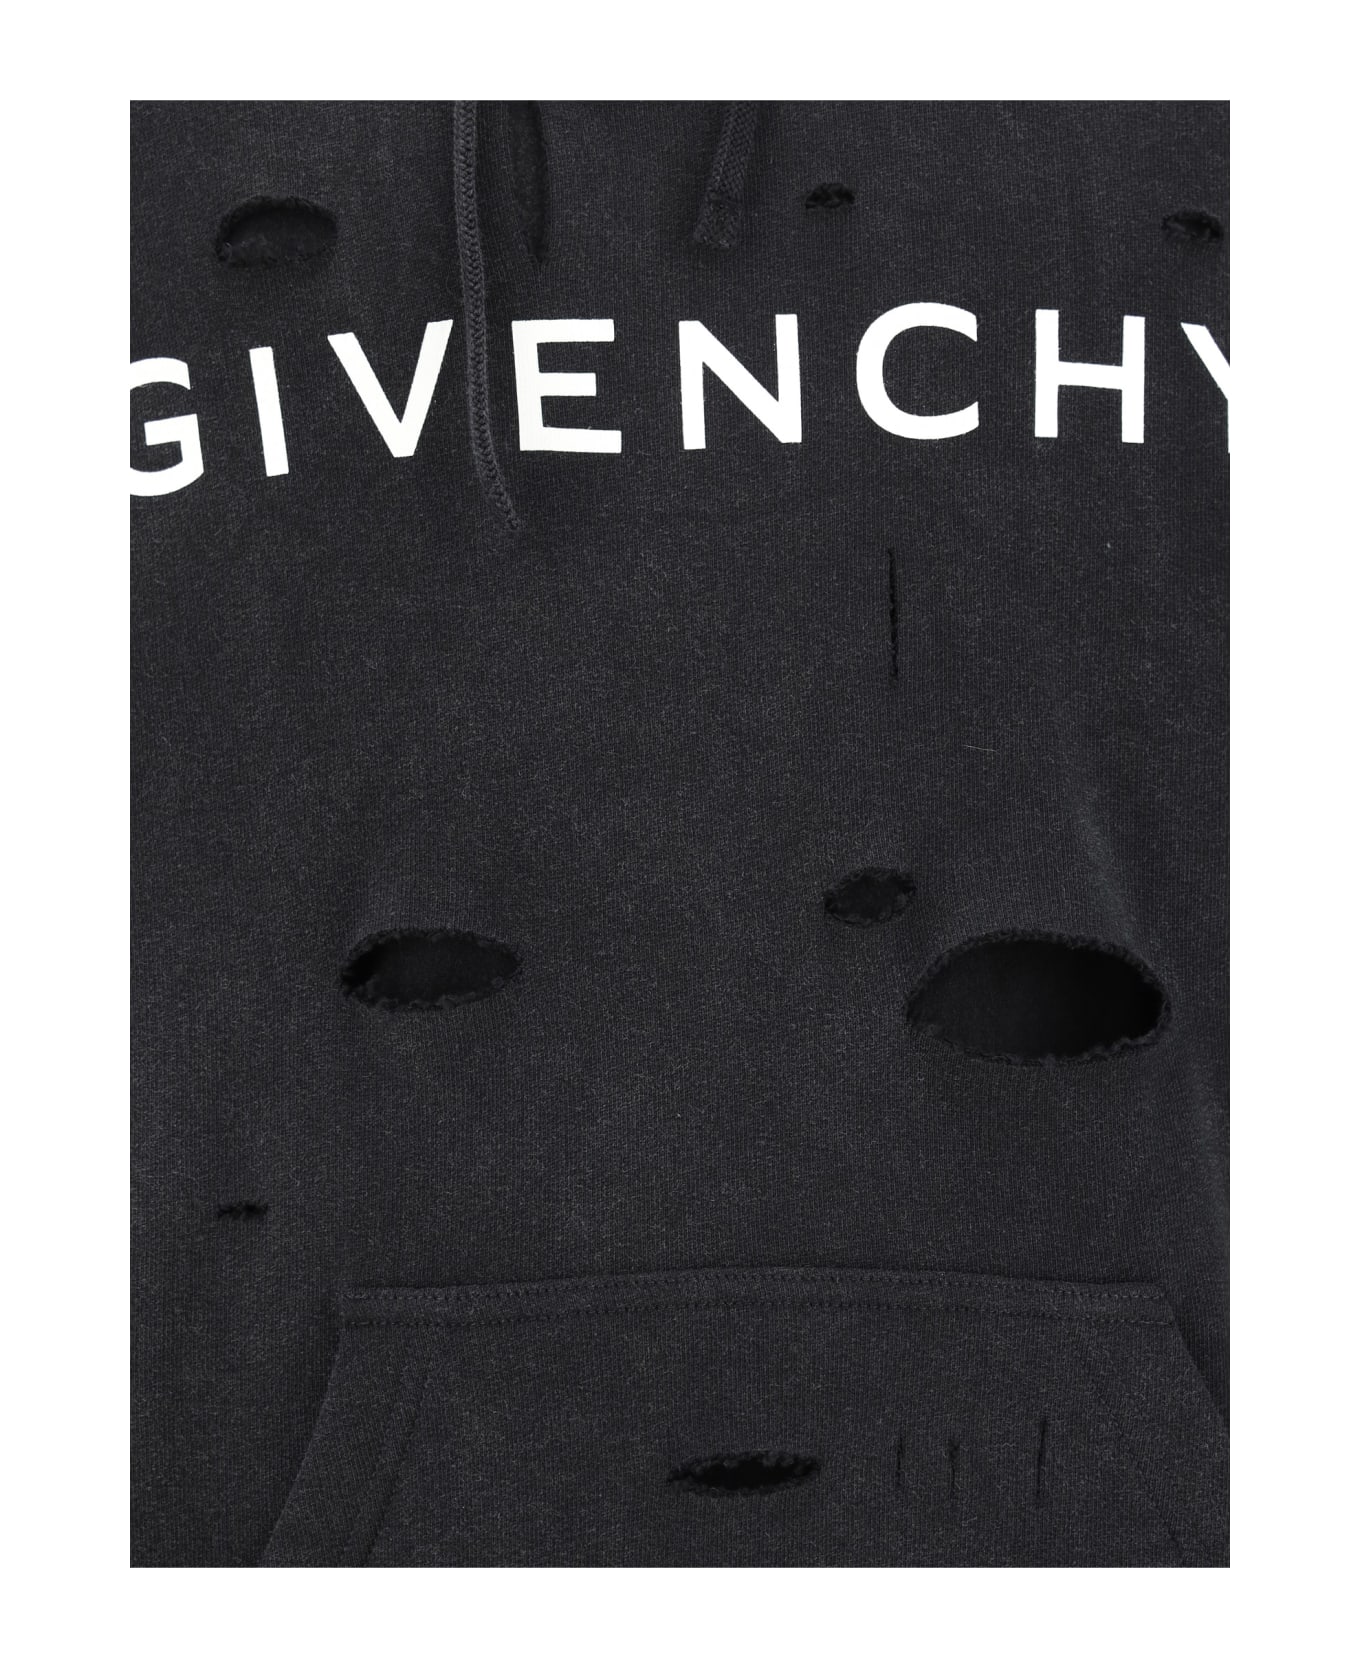 Givenchy Classic Hoodie - Faded Black